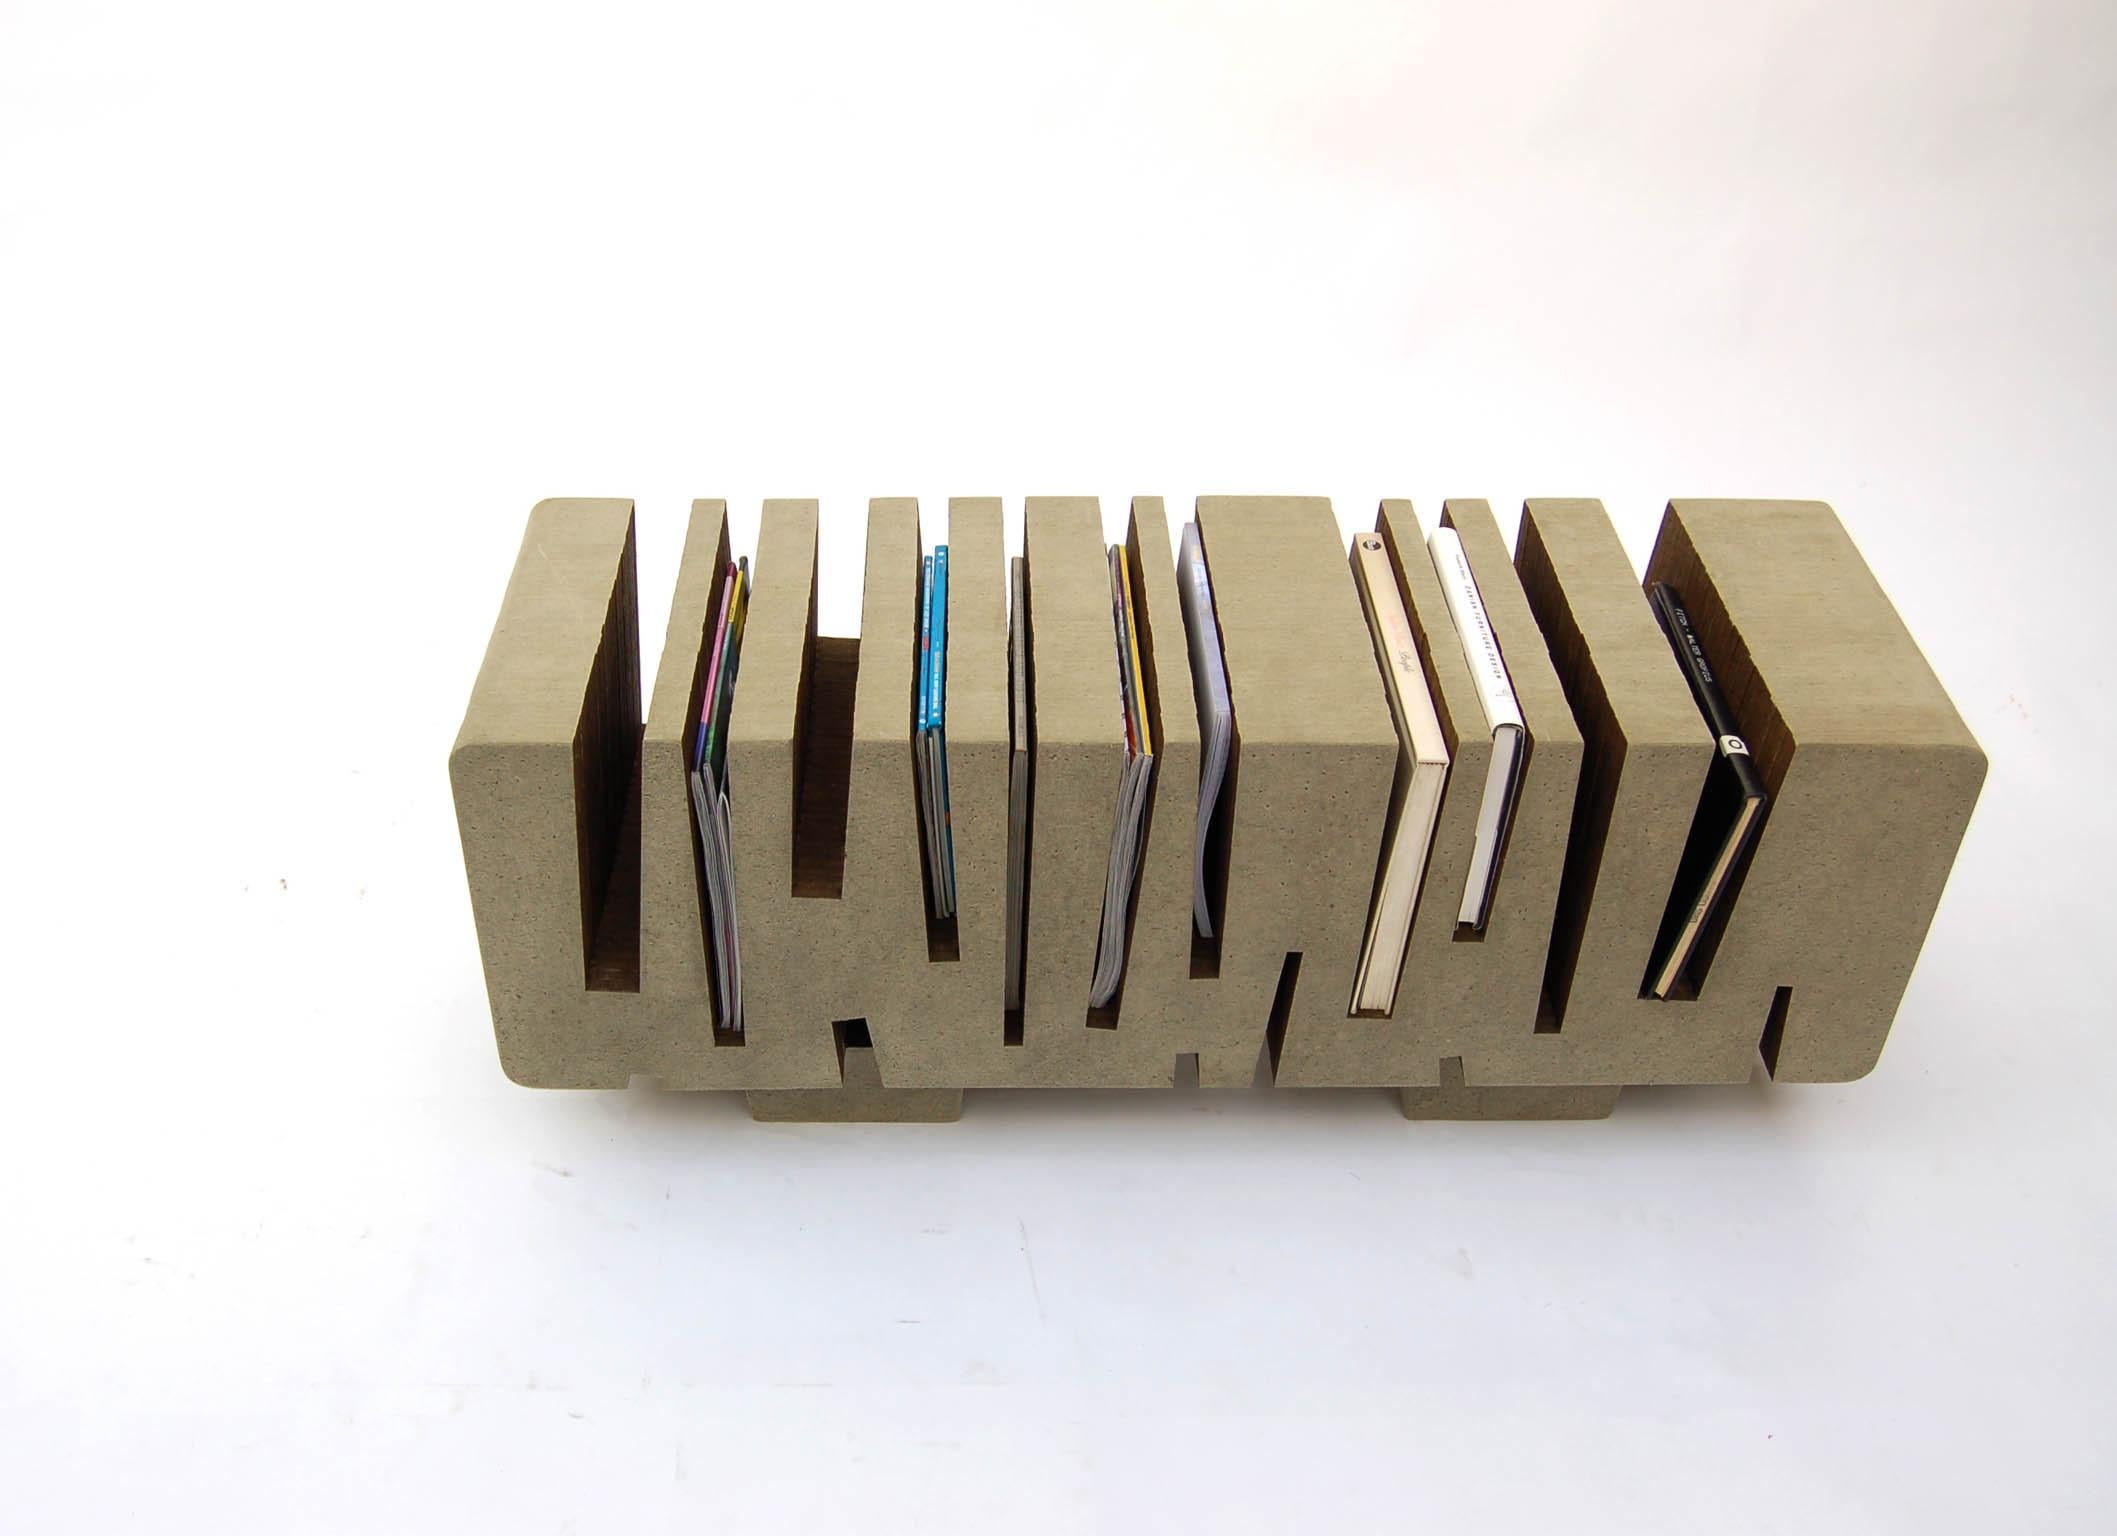 Coffee tables, benches and side tables made from stacking layers of recycled paper board. Cuts in the assembled paper blocks hold reading materials close at hand. The paper series explores the aesthetic possibilities of the new, old and re-usable.